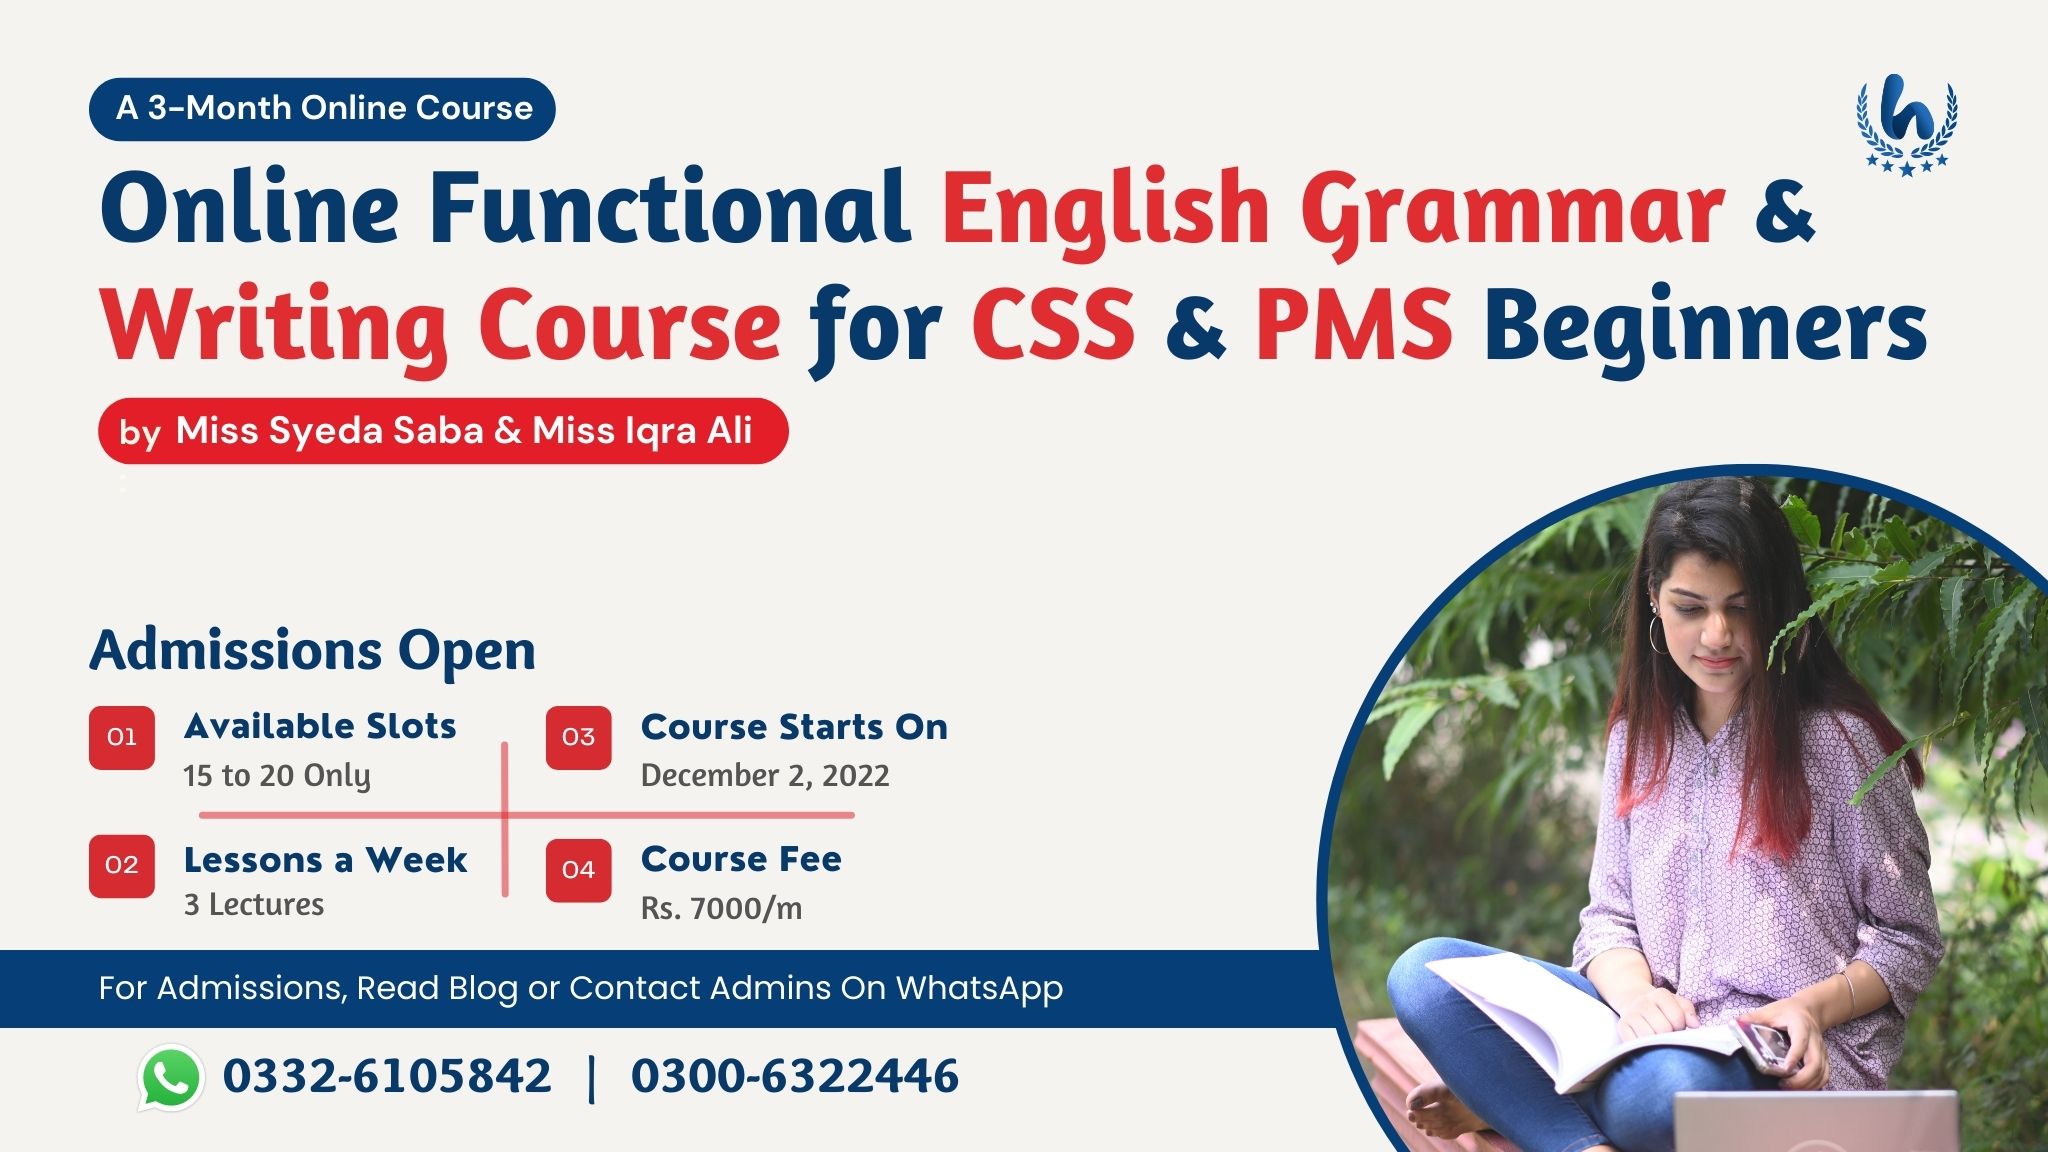 Online Functional English Grammar & Writing Course for CSS & PMS Beginners